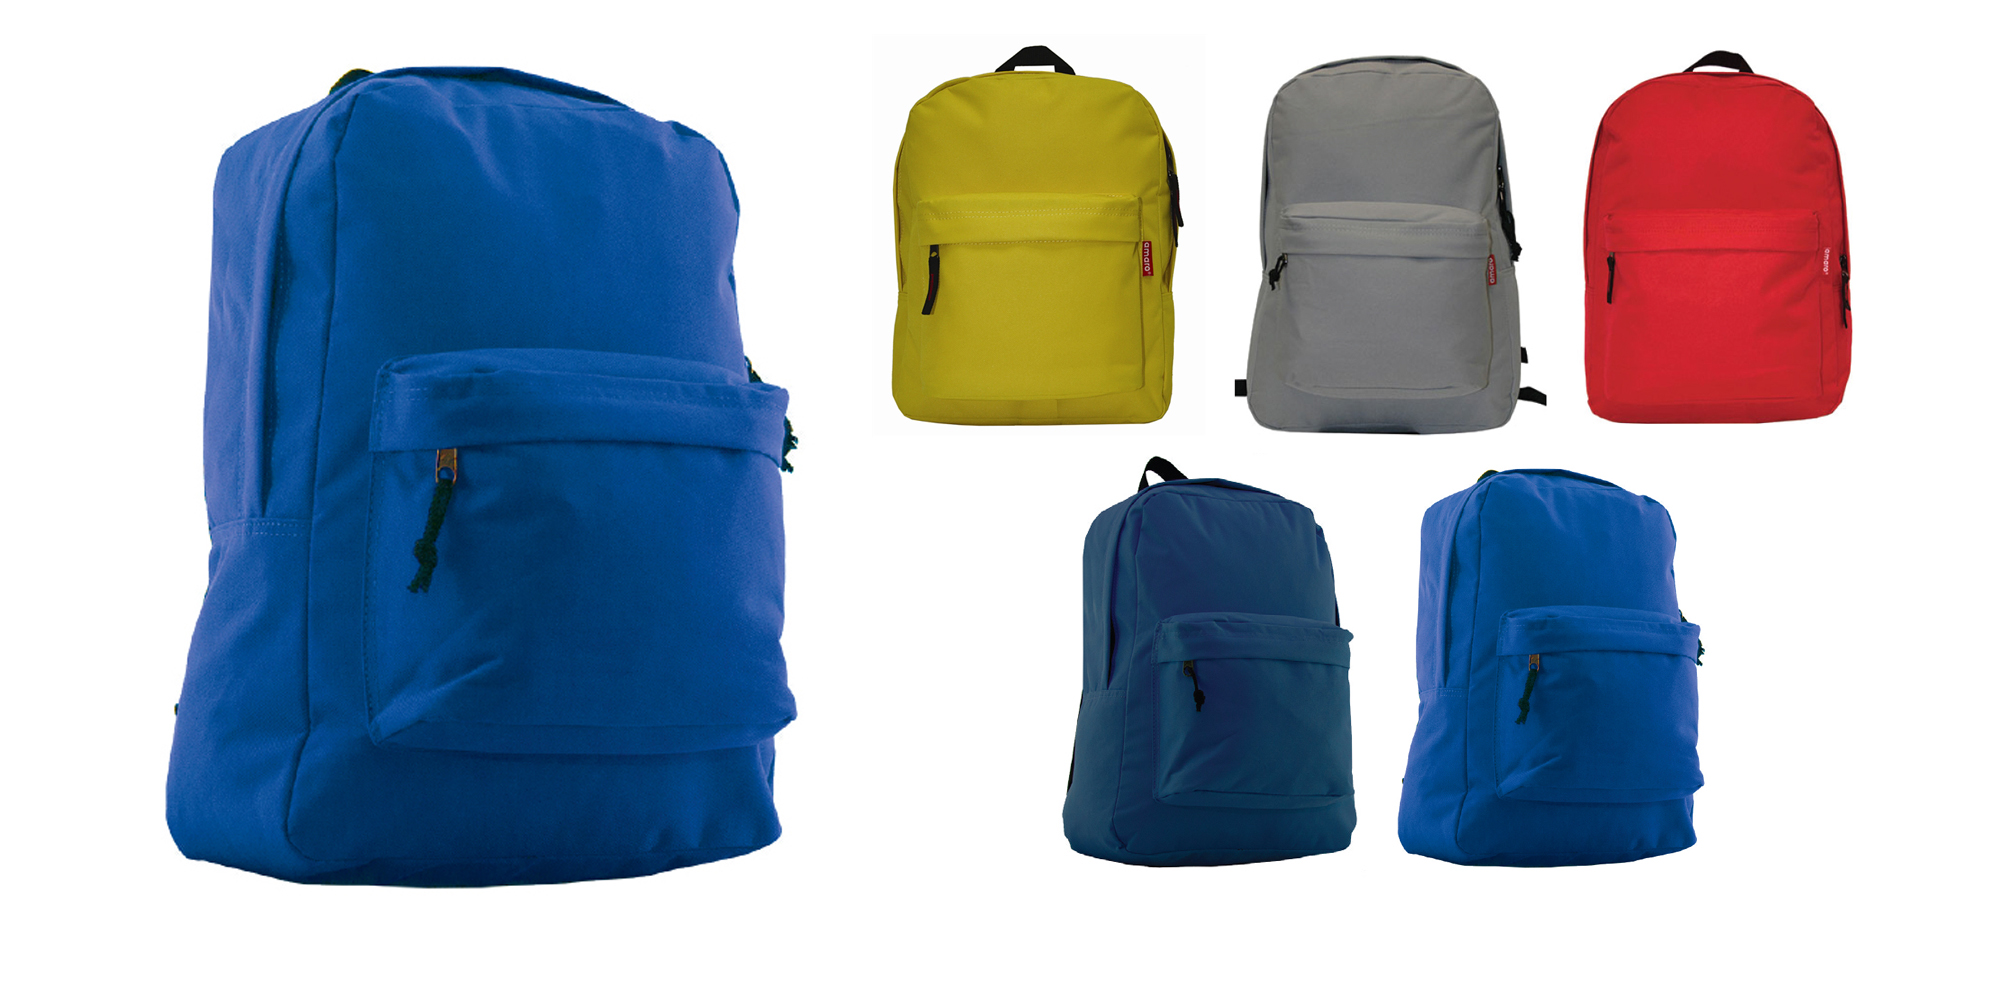 ''13.5'''' Small Classic BACKPACKs - Choose Your Color(s)''